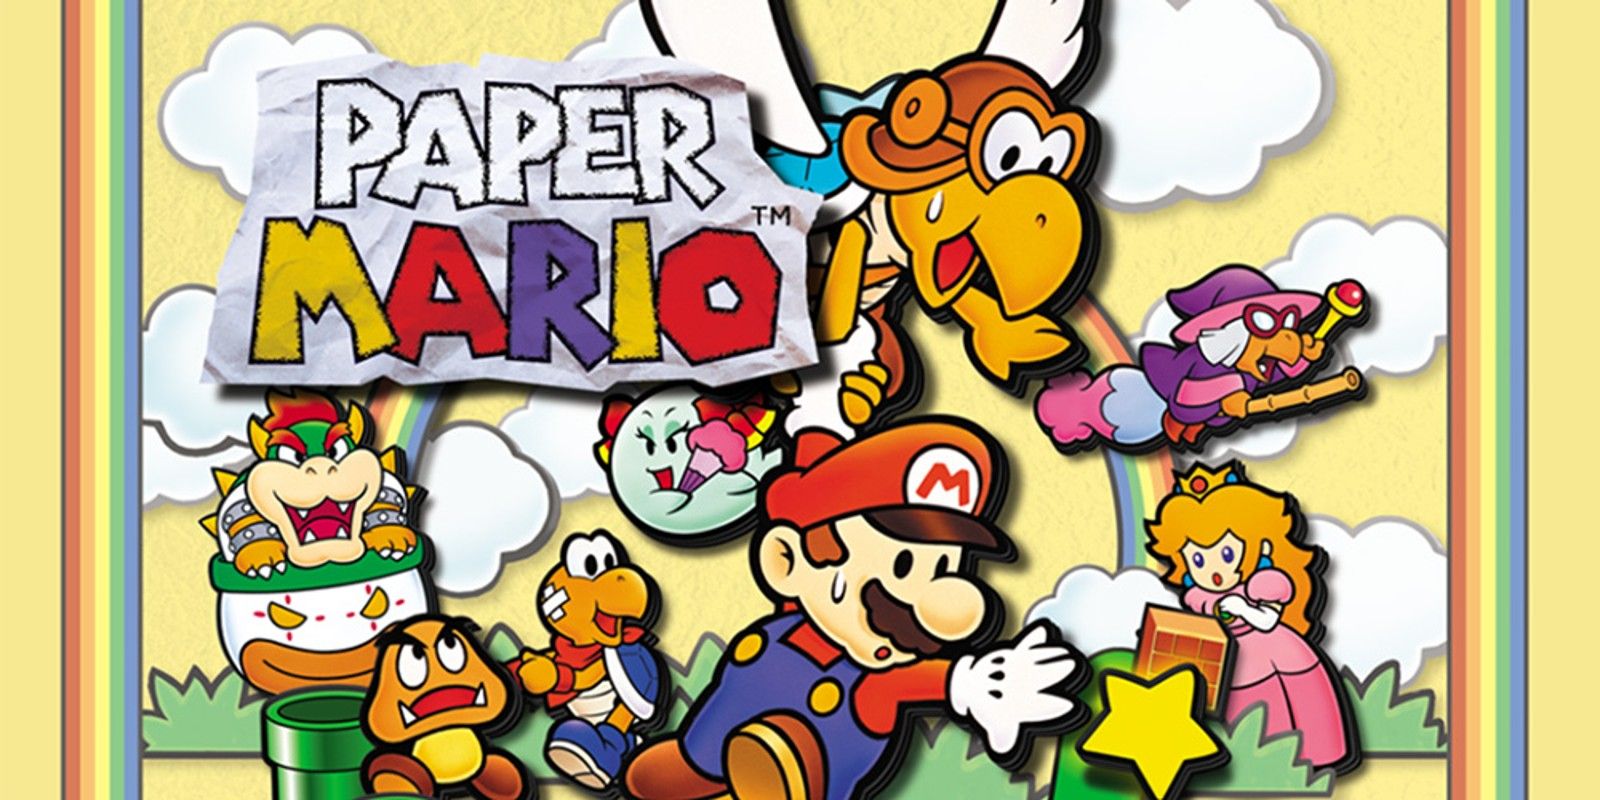 Paper Mario's prologue leads the player to a boss fight with the Goomba King.